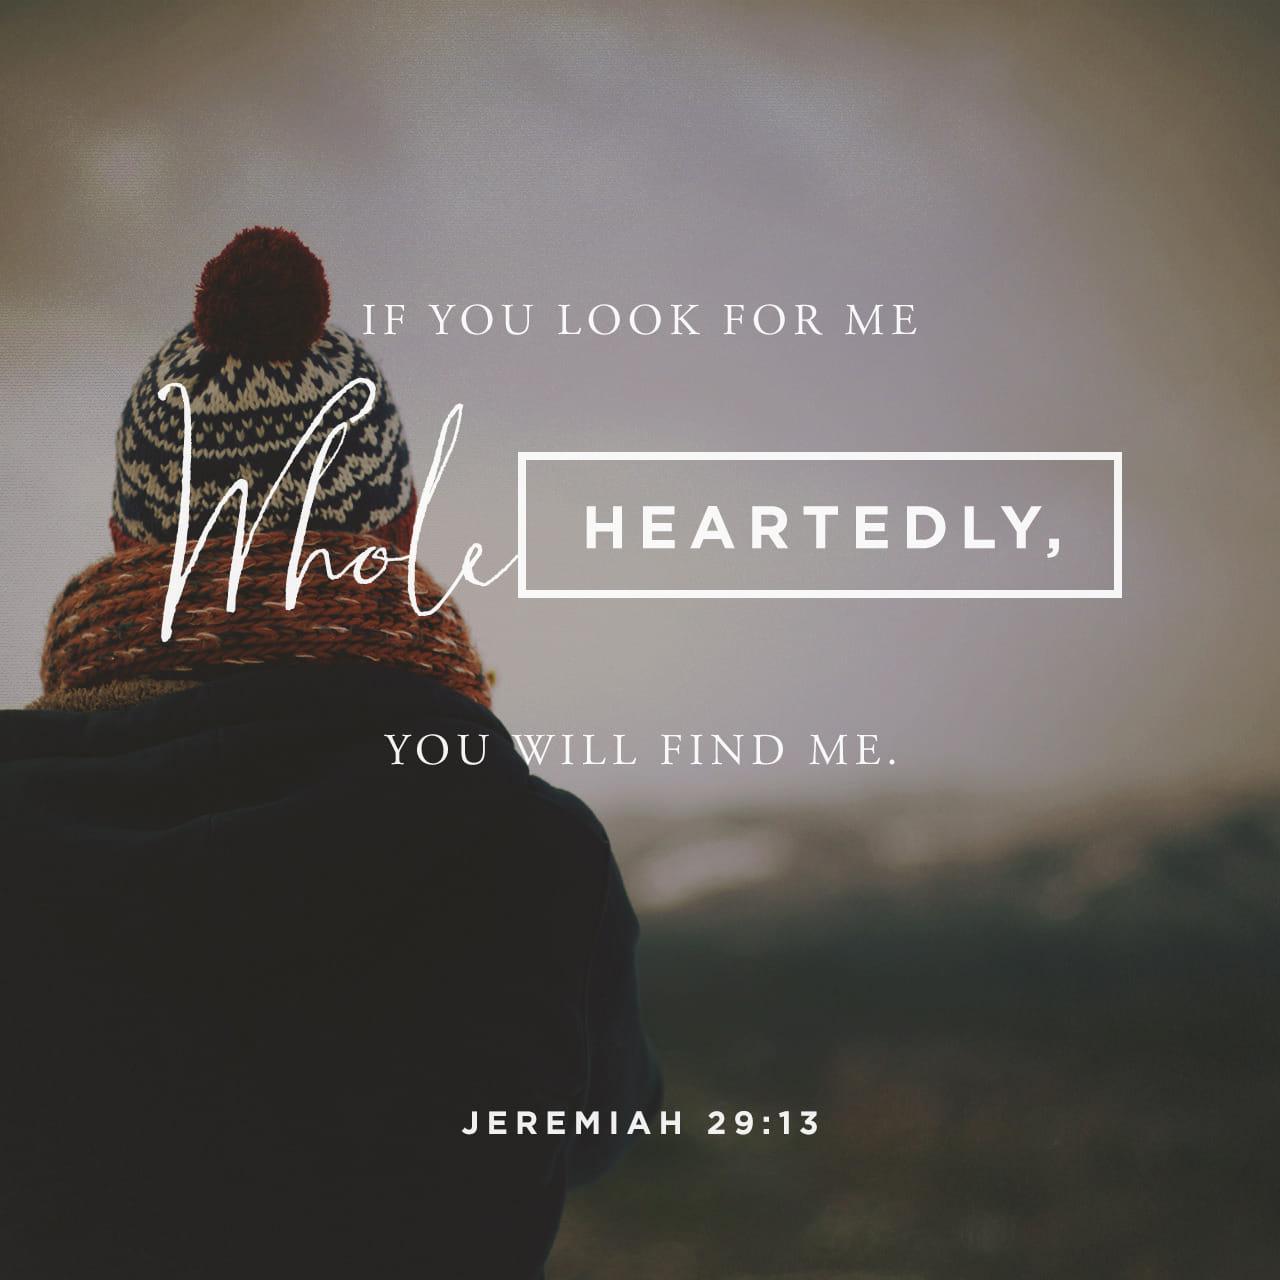 Bible Verse of the Day - day 88 - image 418 (Jeremiah 29:13)